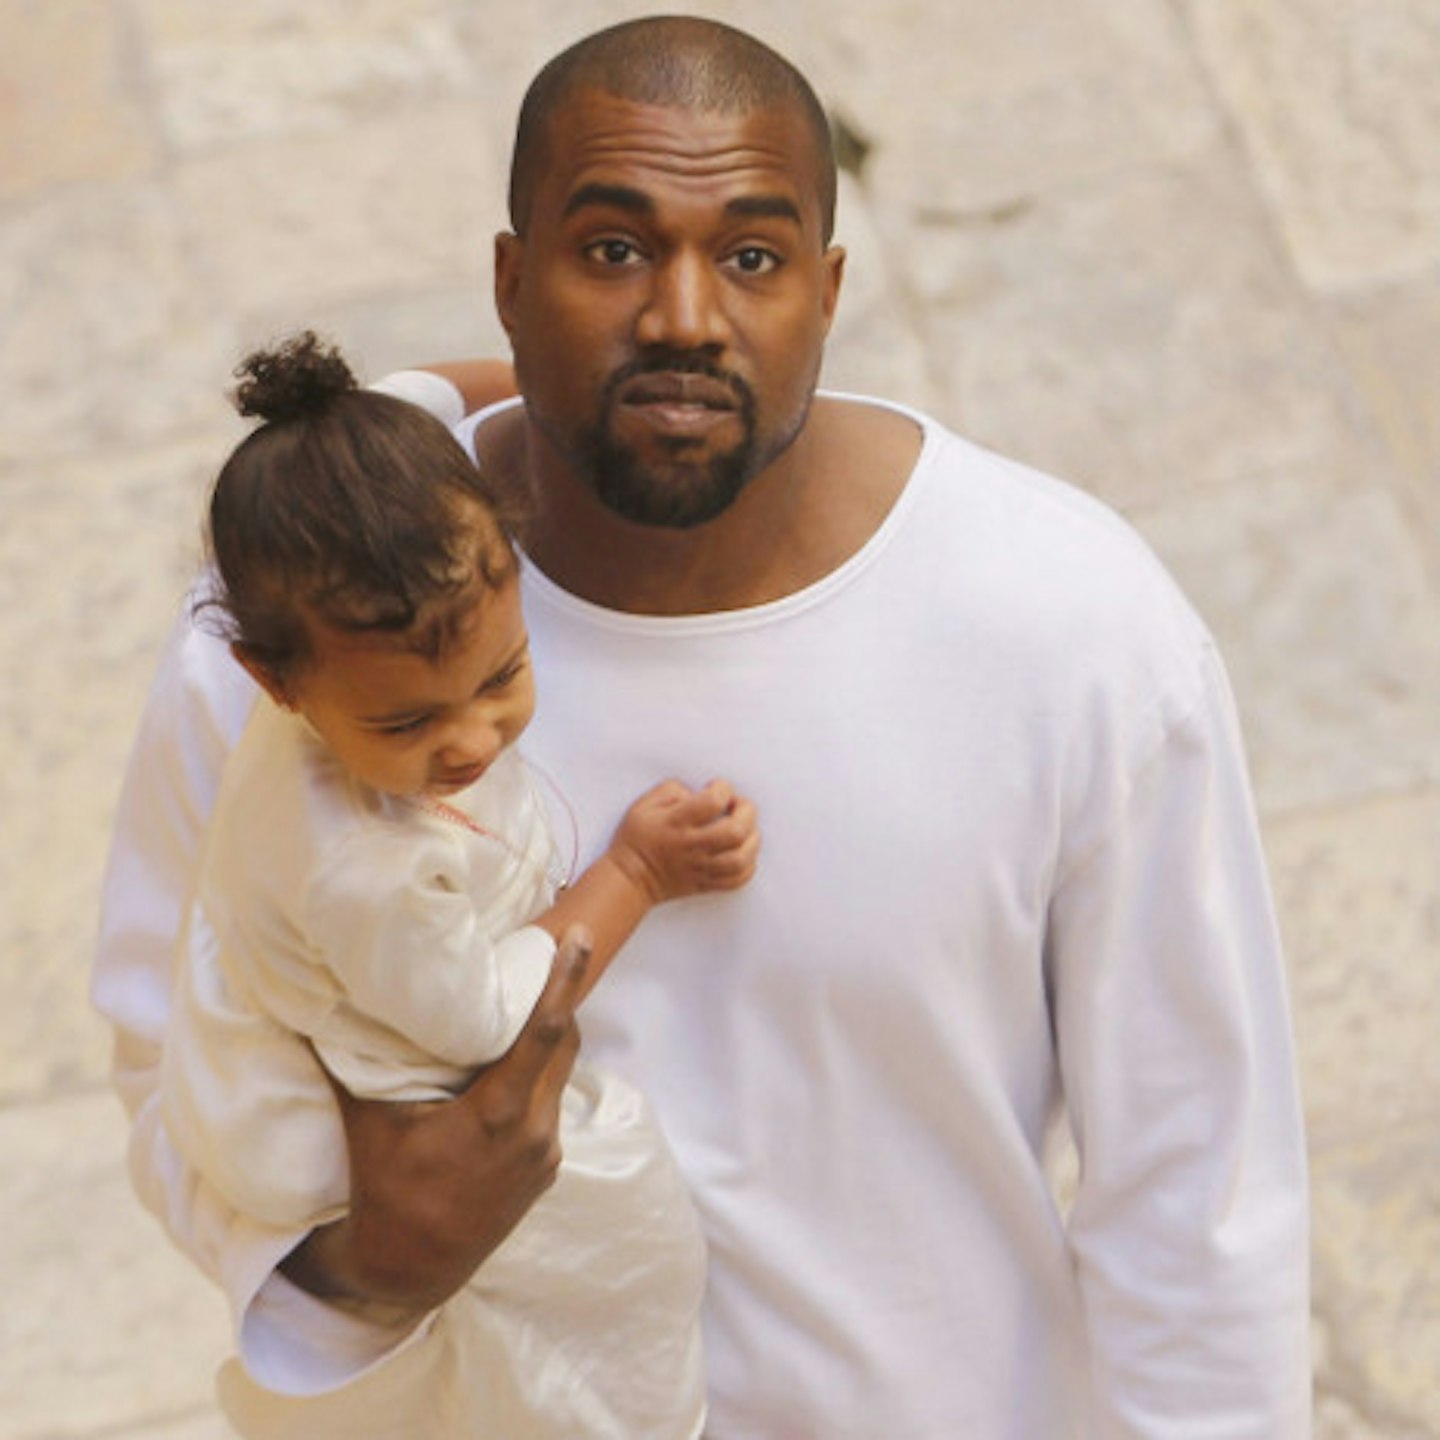 Kanye is upset that North was able to spend so much money